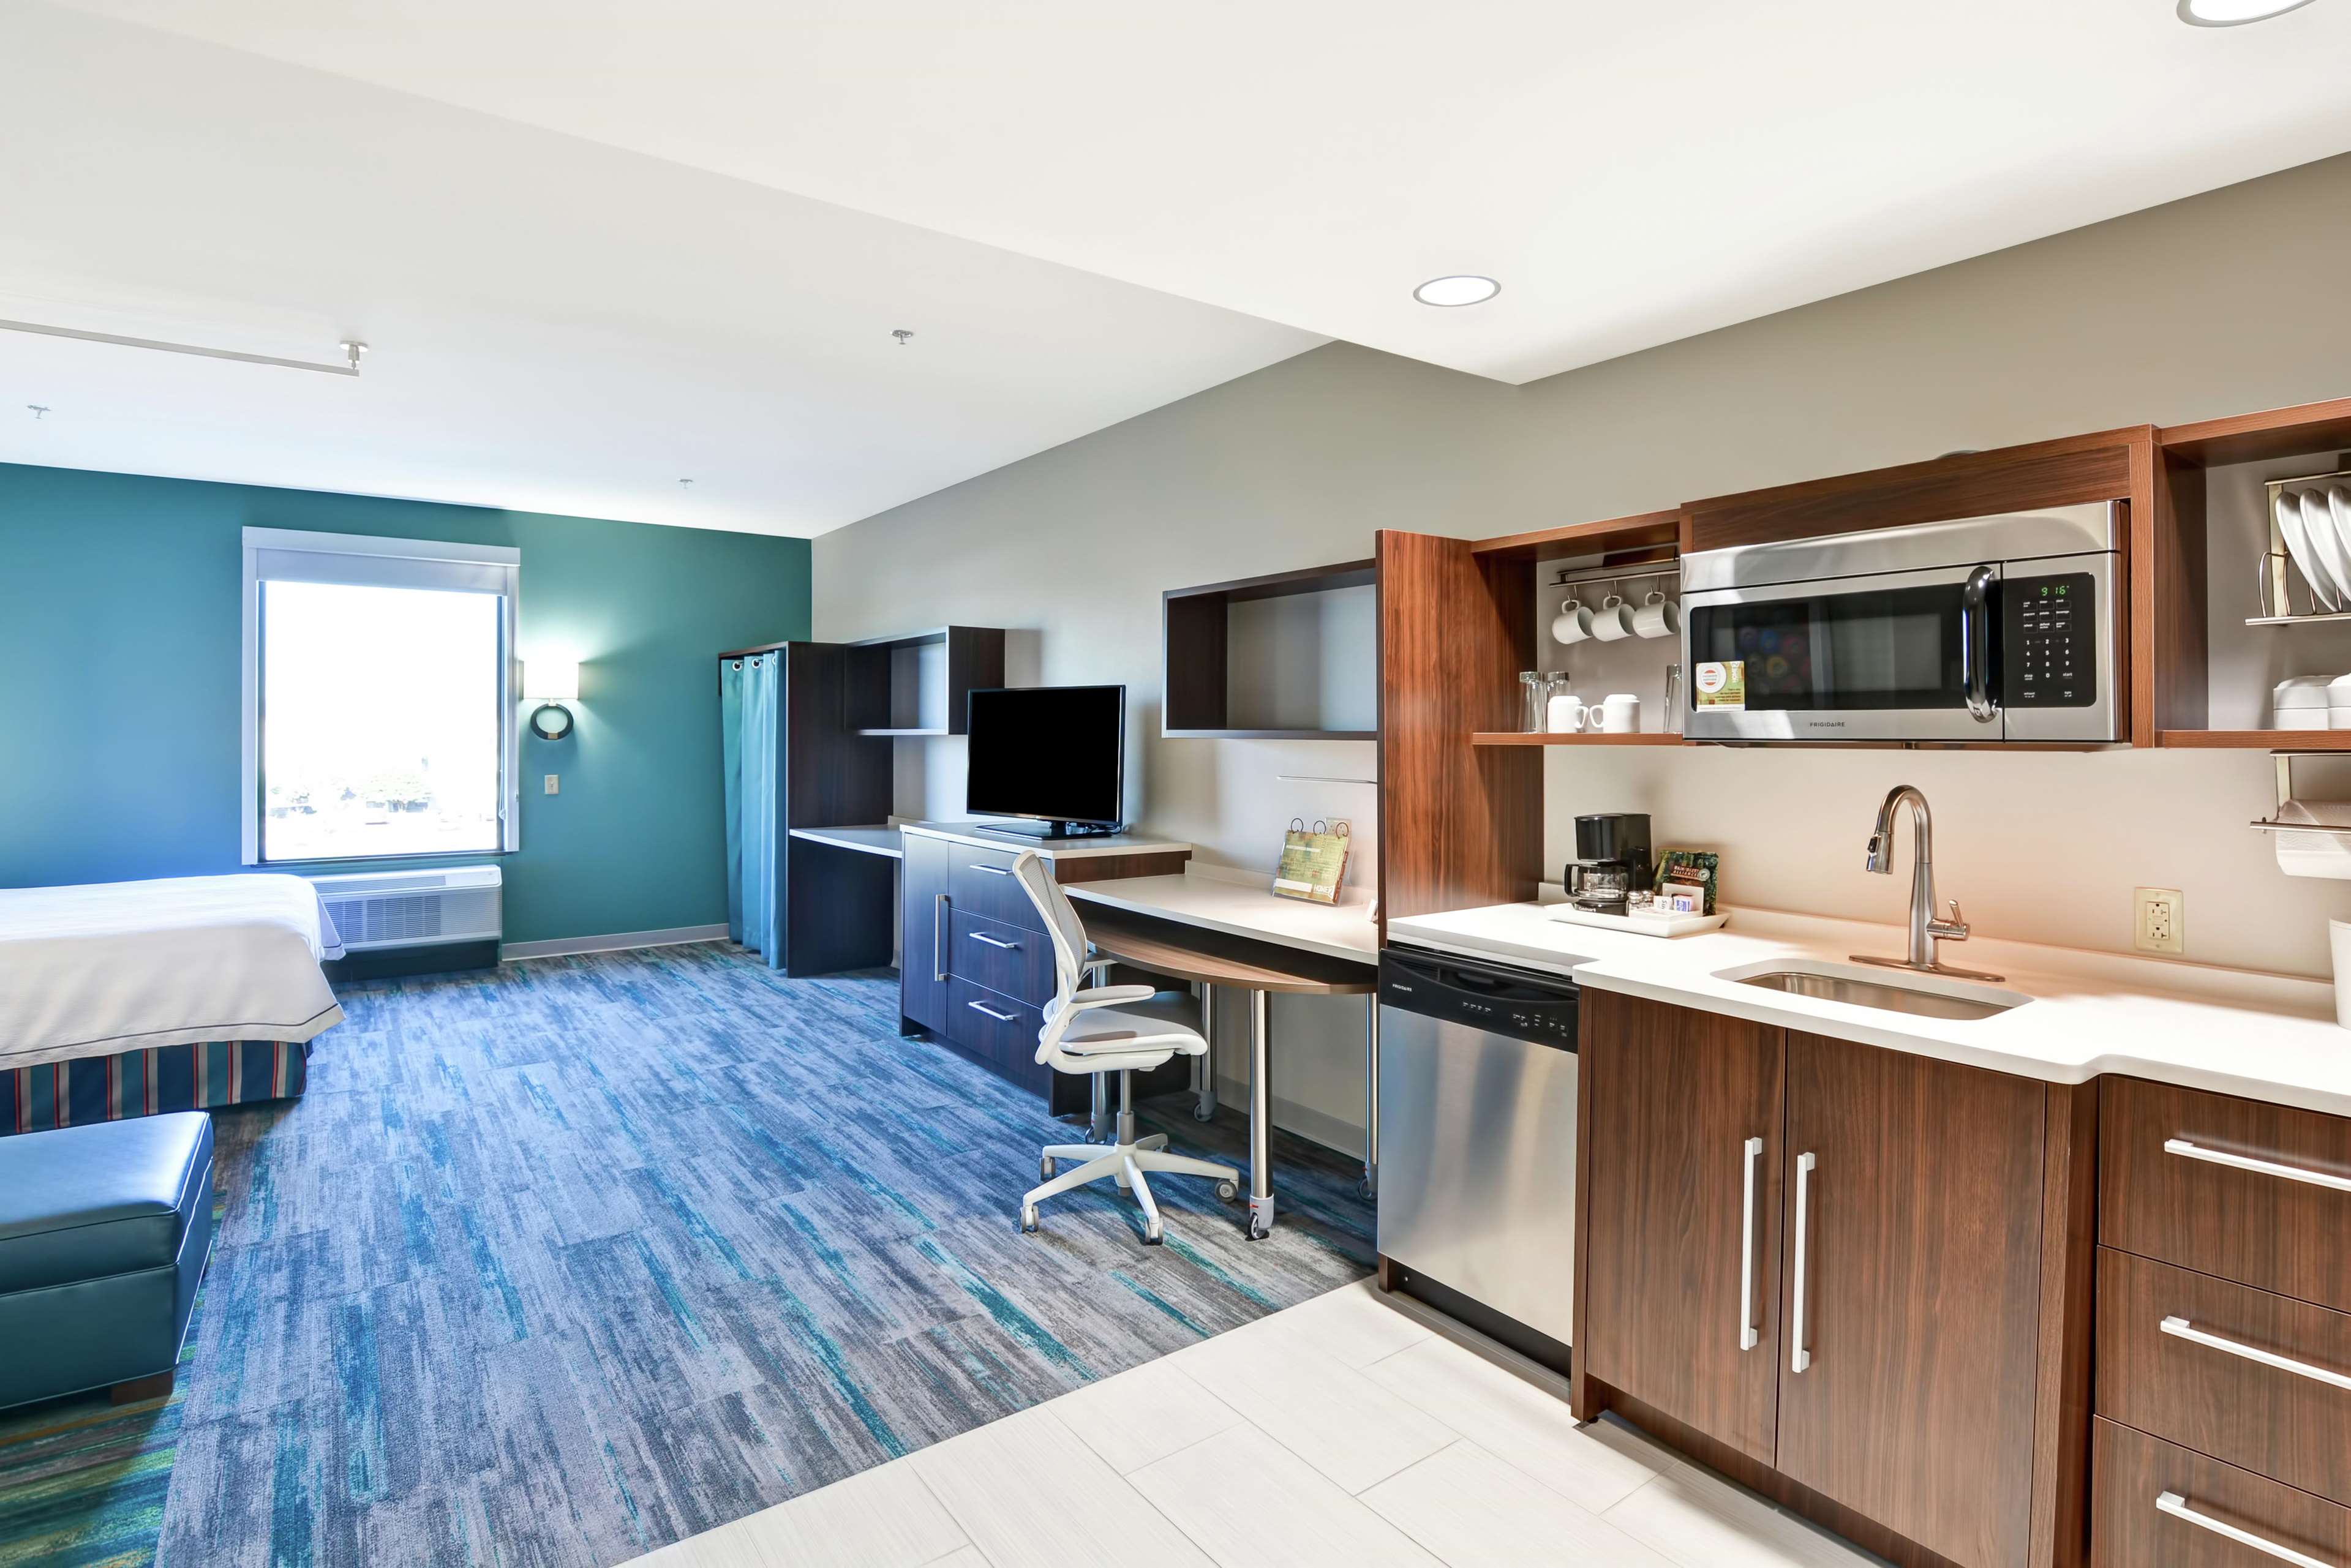 Home2 Suites By Hilton Conway Photo